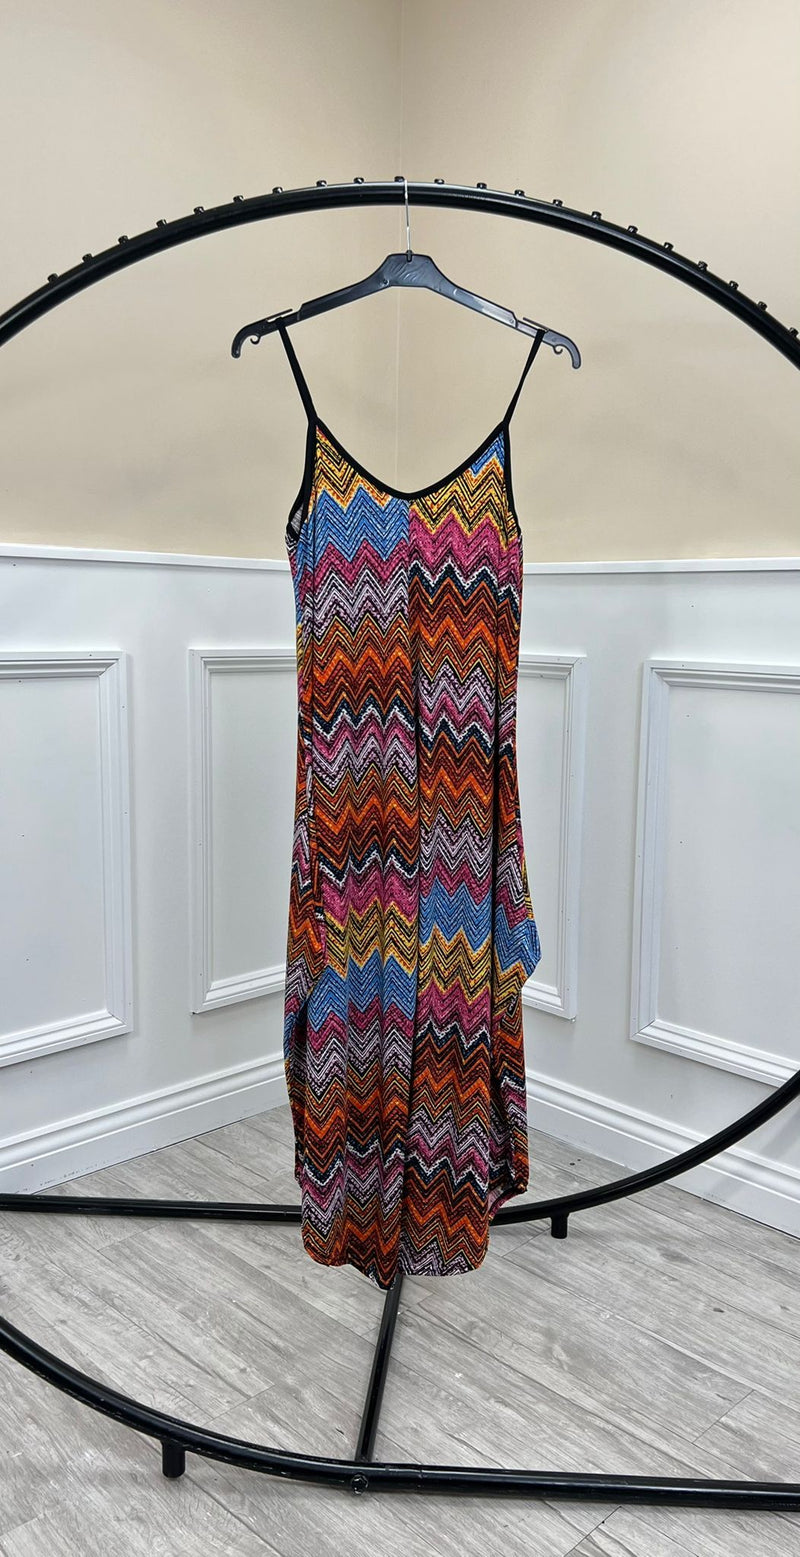 Sorocco Patterned Jumpsuit - More Designs Available